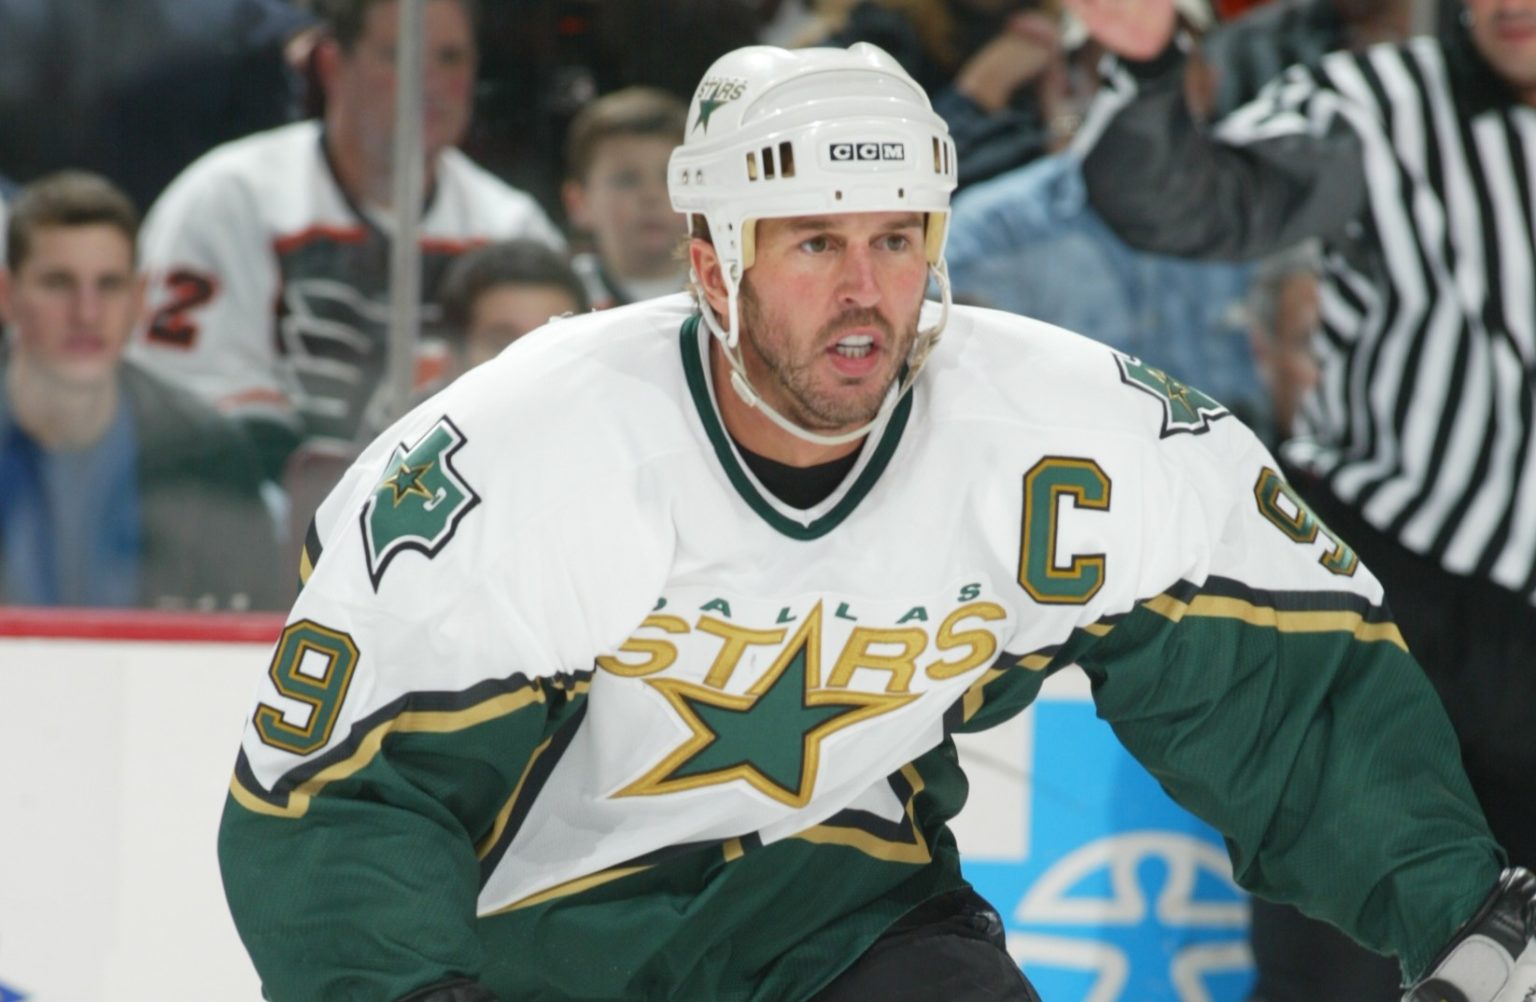 9-is-number-one-the-best-players-to-wear-9-in-nhl-history